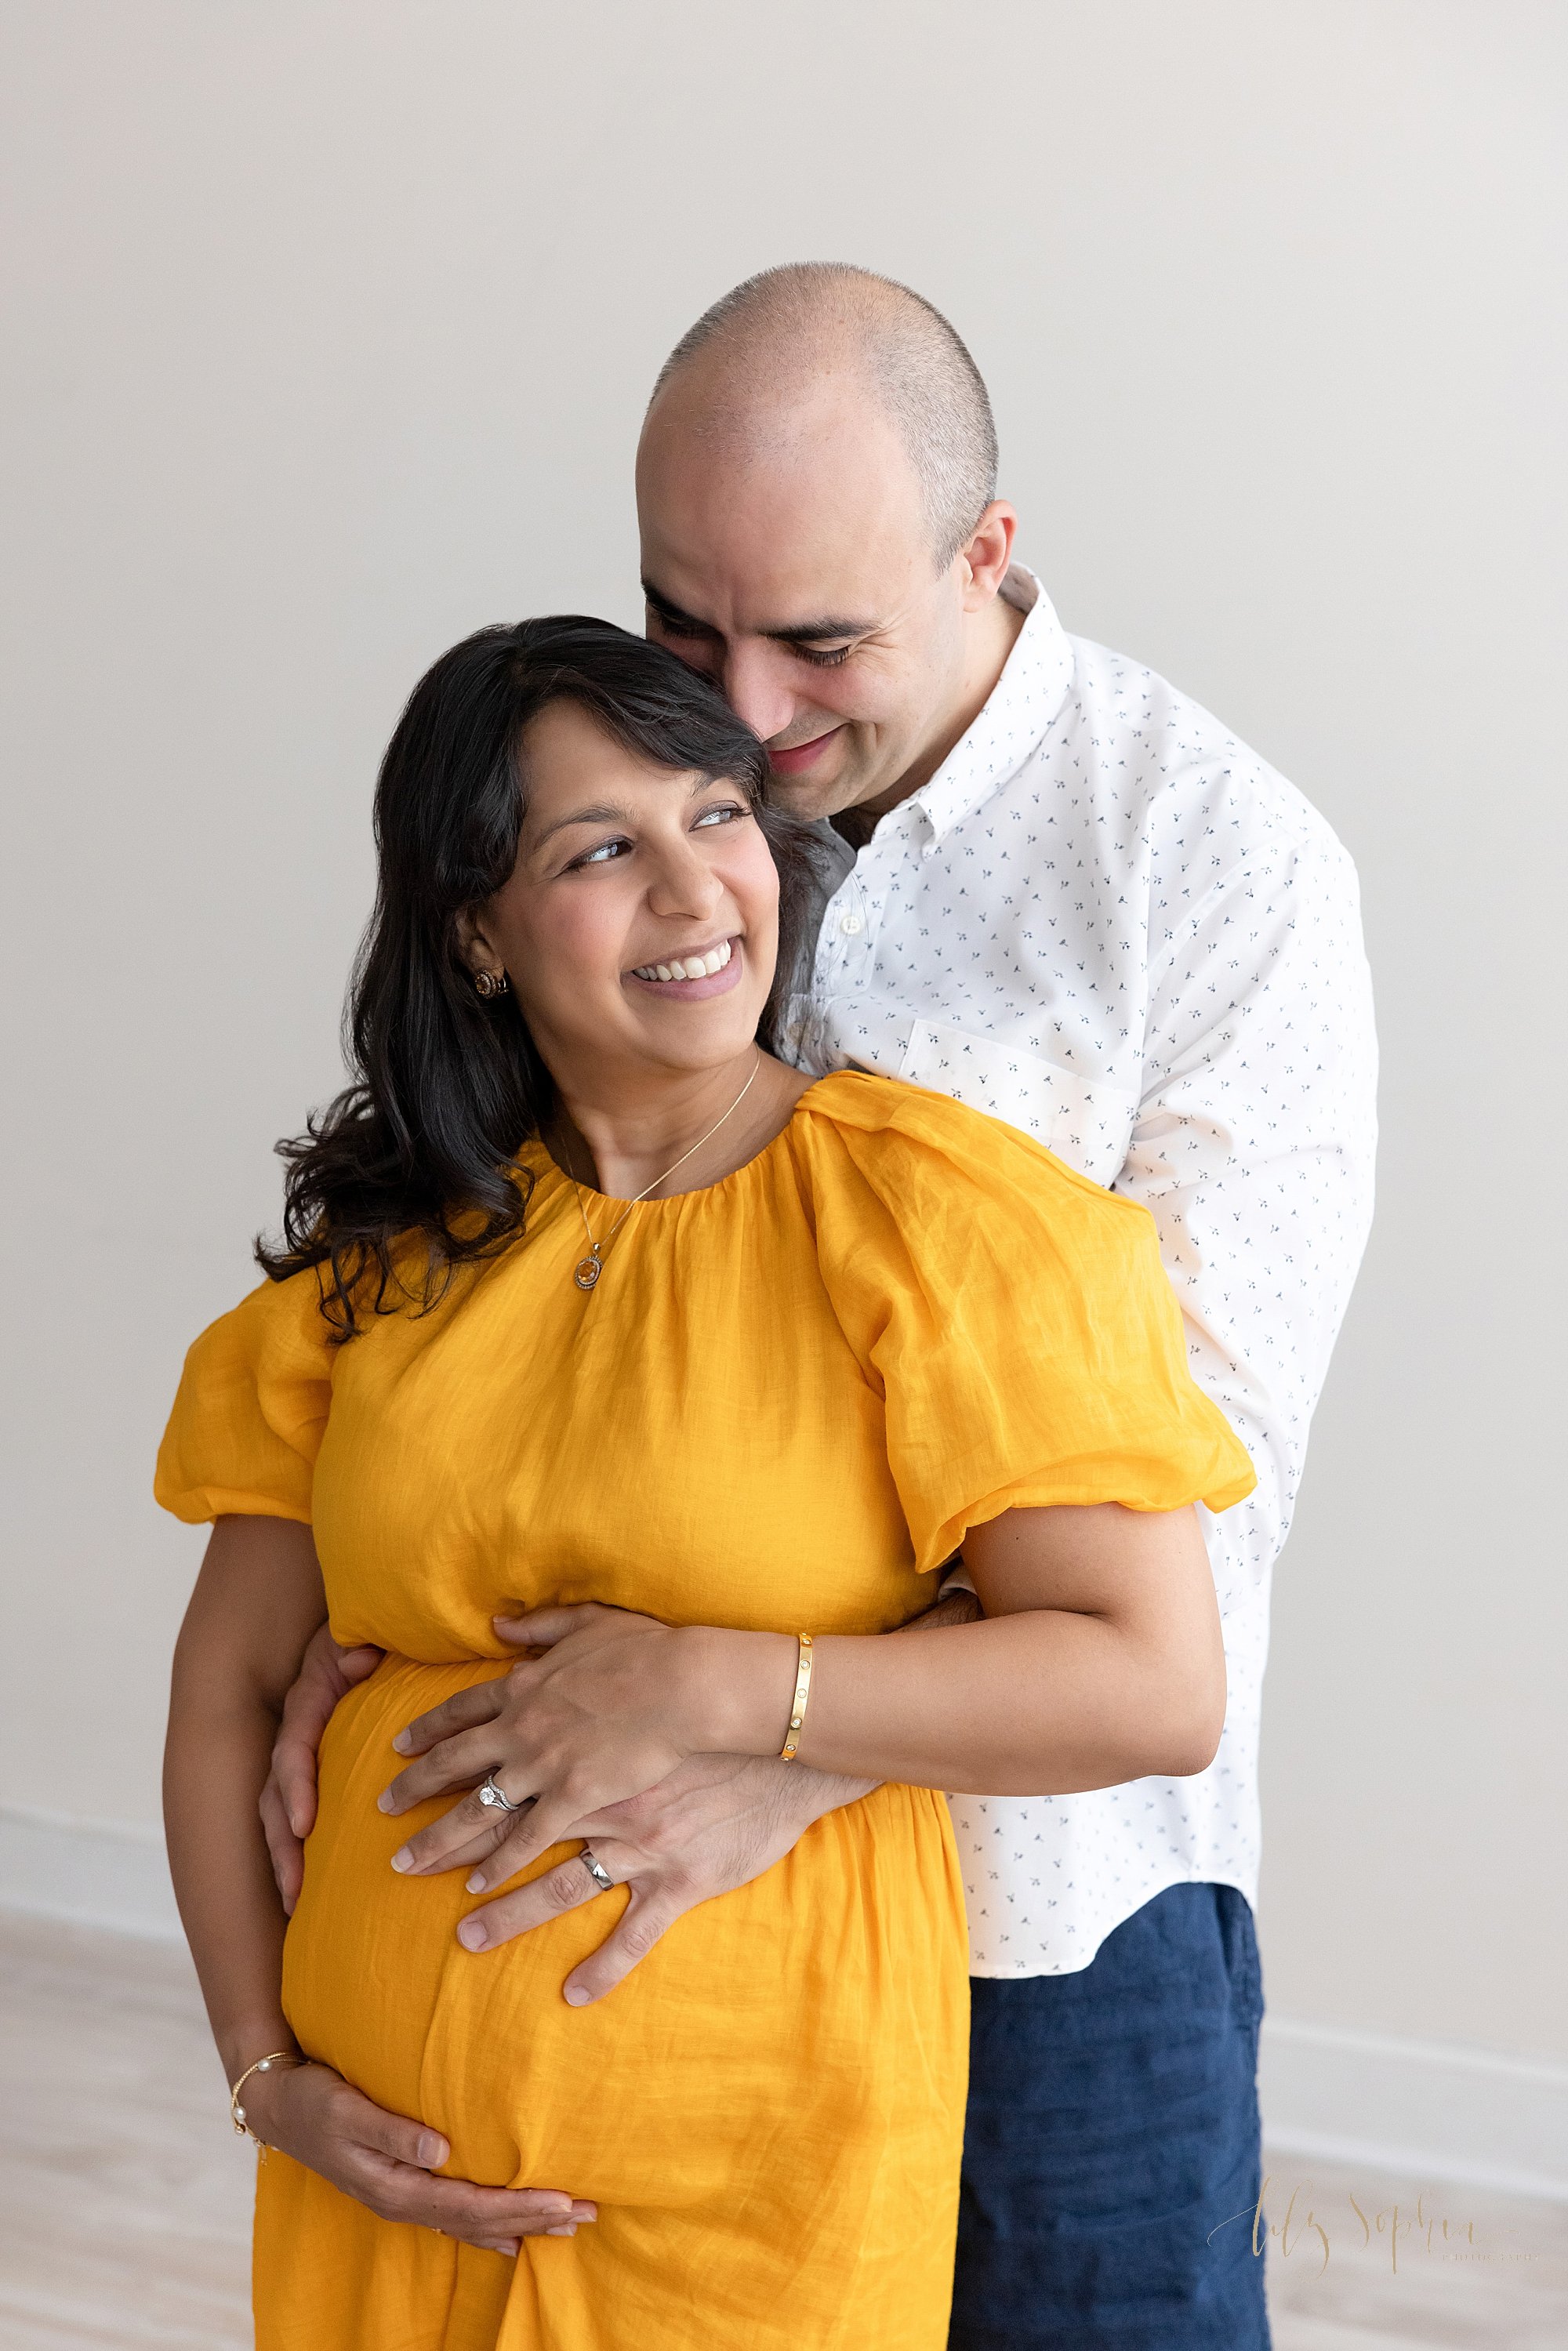  Maternity picture taken in a photography studio with the husband standing behind his pregnant wife as she holds the base of her belly with her right hand and her husband places his left hand on their baby in utero as his wife puts her hand on top of